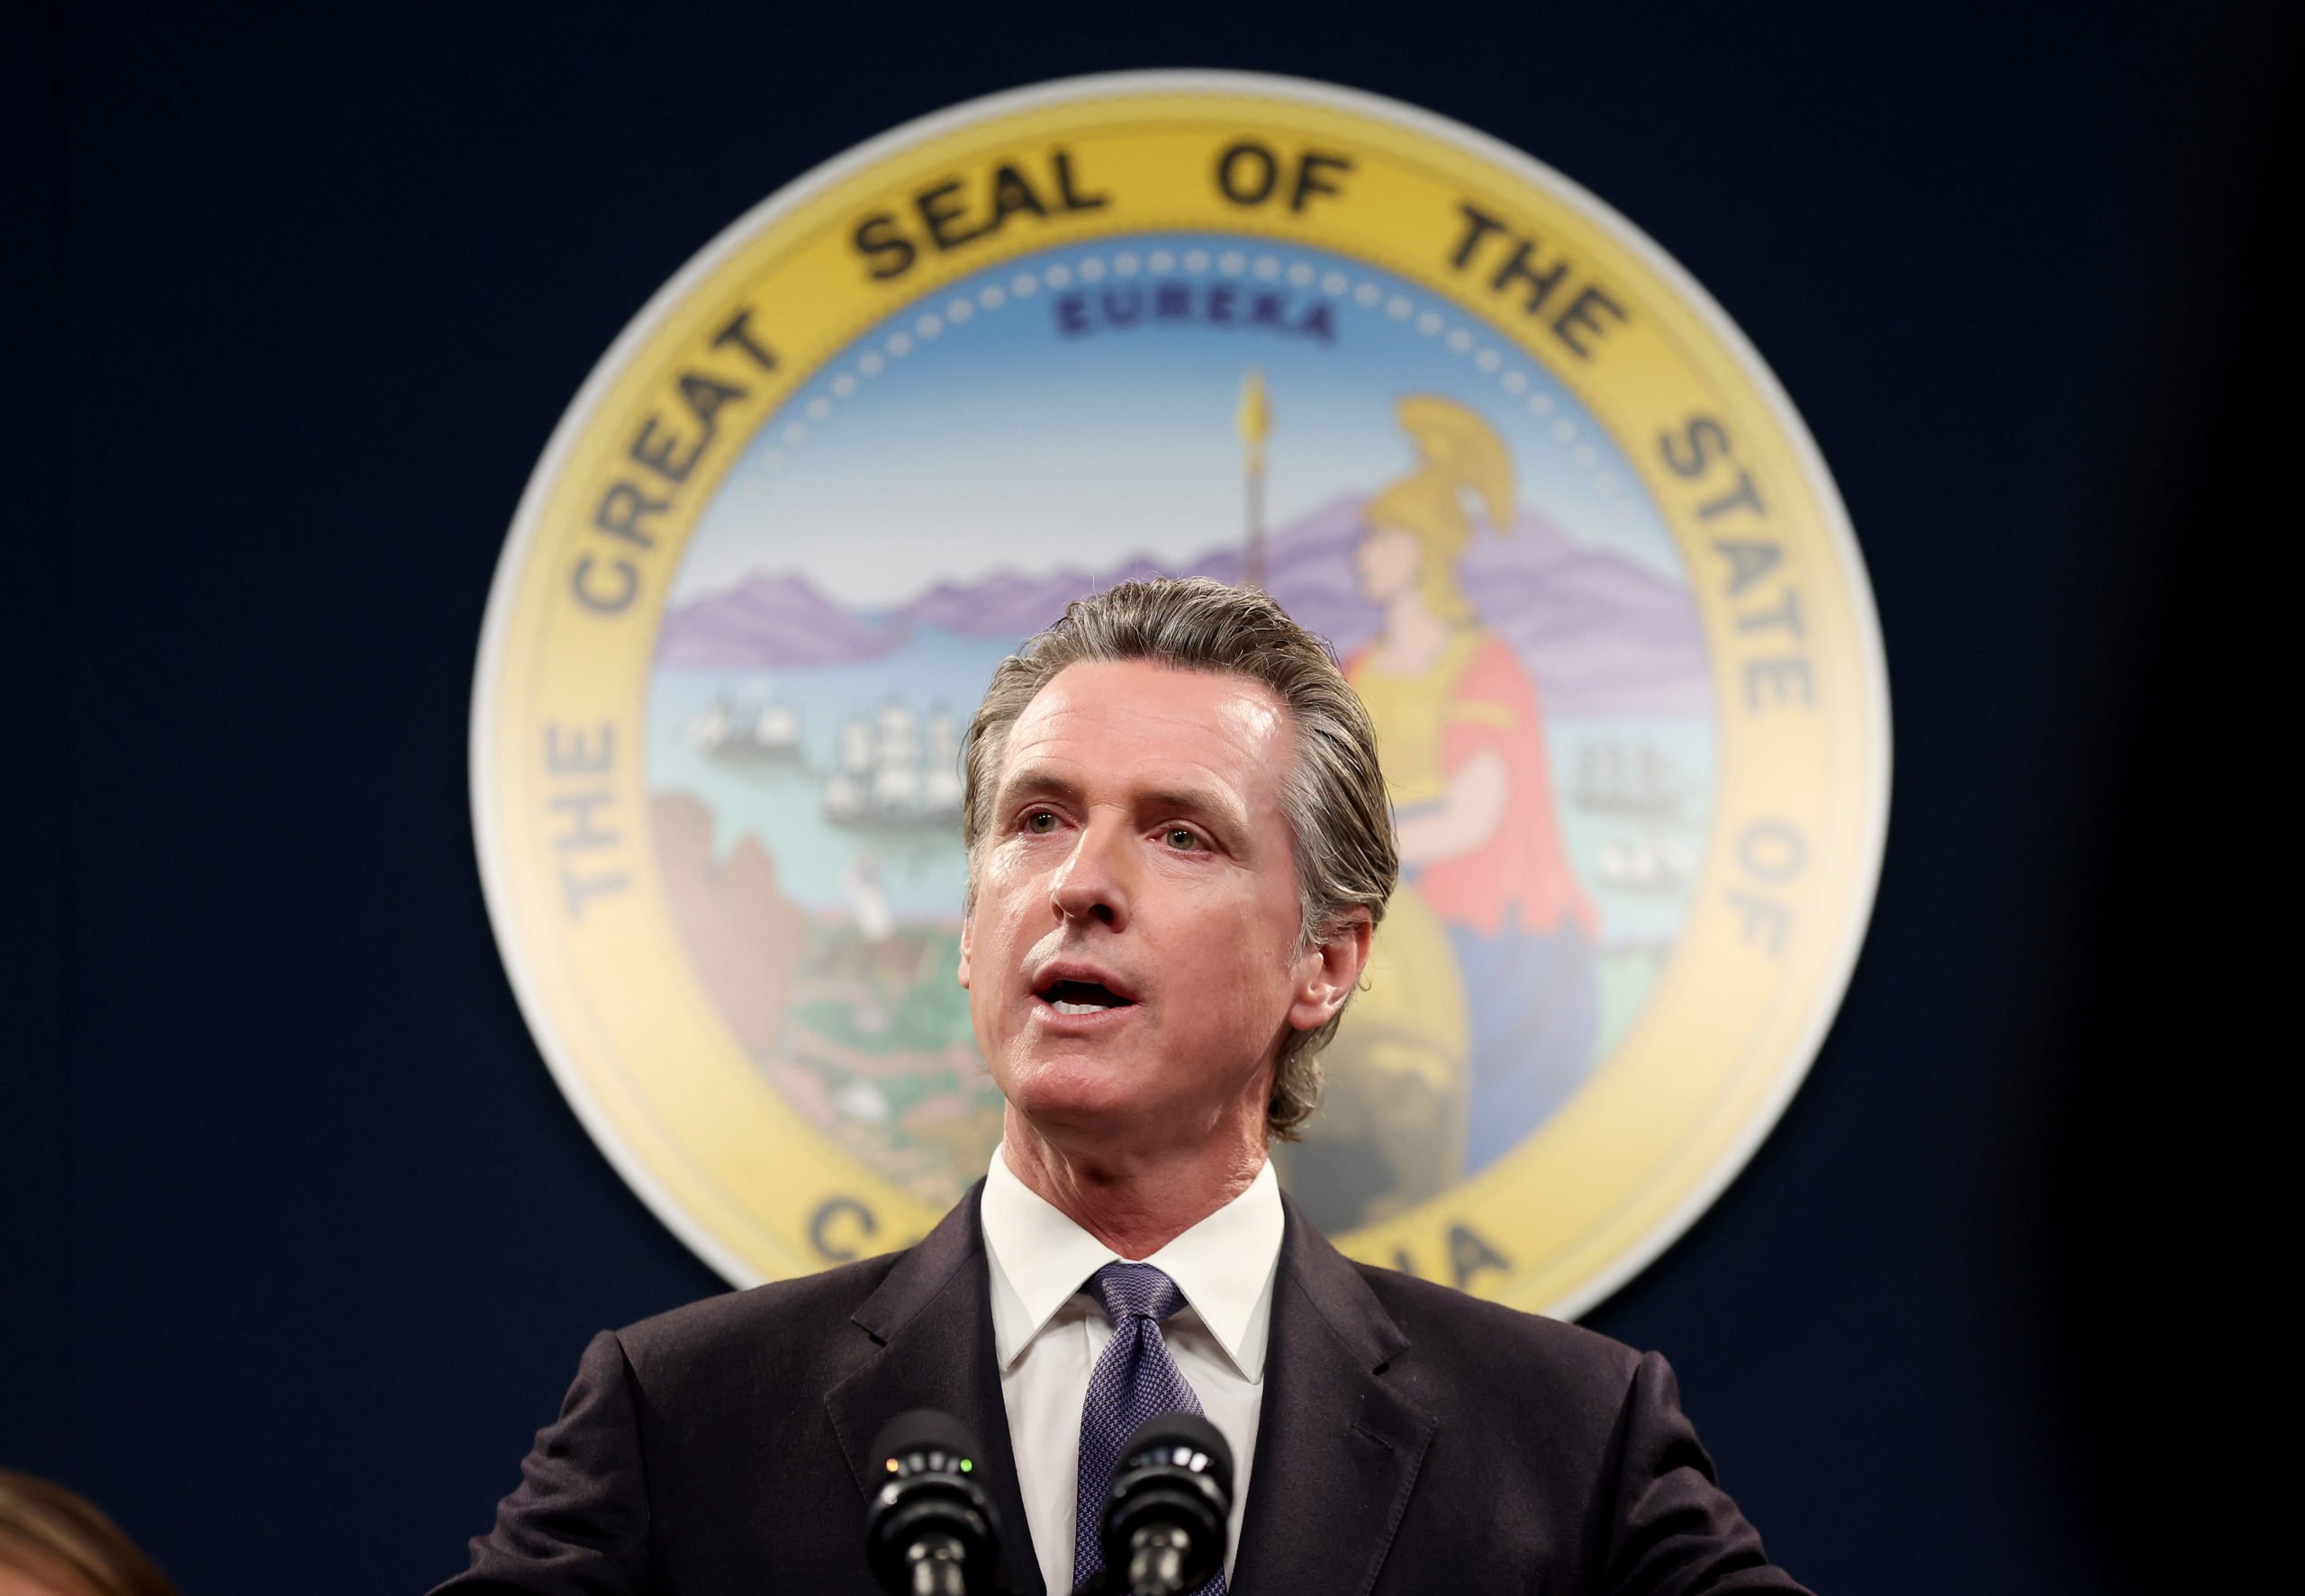 SACRAMENTO, CALIFORNIA - FEBRUARY 01: California Gov. Gavin Newsom speaks during a press conference on February 01, 2023 in Sacramento, California. California Gov. Gavin Newsom, state Attorney General Rob Bonta, state Senator Anthony Portantino (D-Burbank) and other state leaders announced SB2 - a new gun safety legislation that would establish stricter standards for Concealed Carry Weapon (CCW) permits to carry a firearm in public. The bill designates "sensitive areas," like bars, amusement parks and child daycare centers where guns would not be allowed. (Photo by Justin Sullivan/Getty Images)